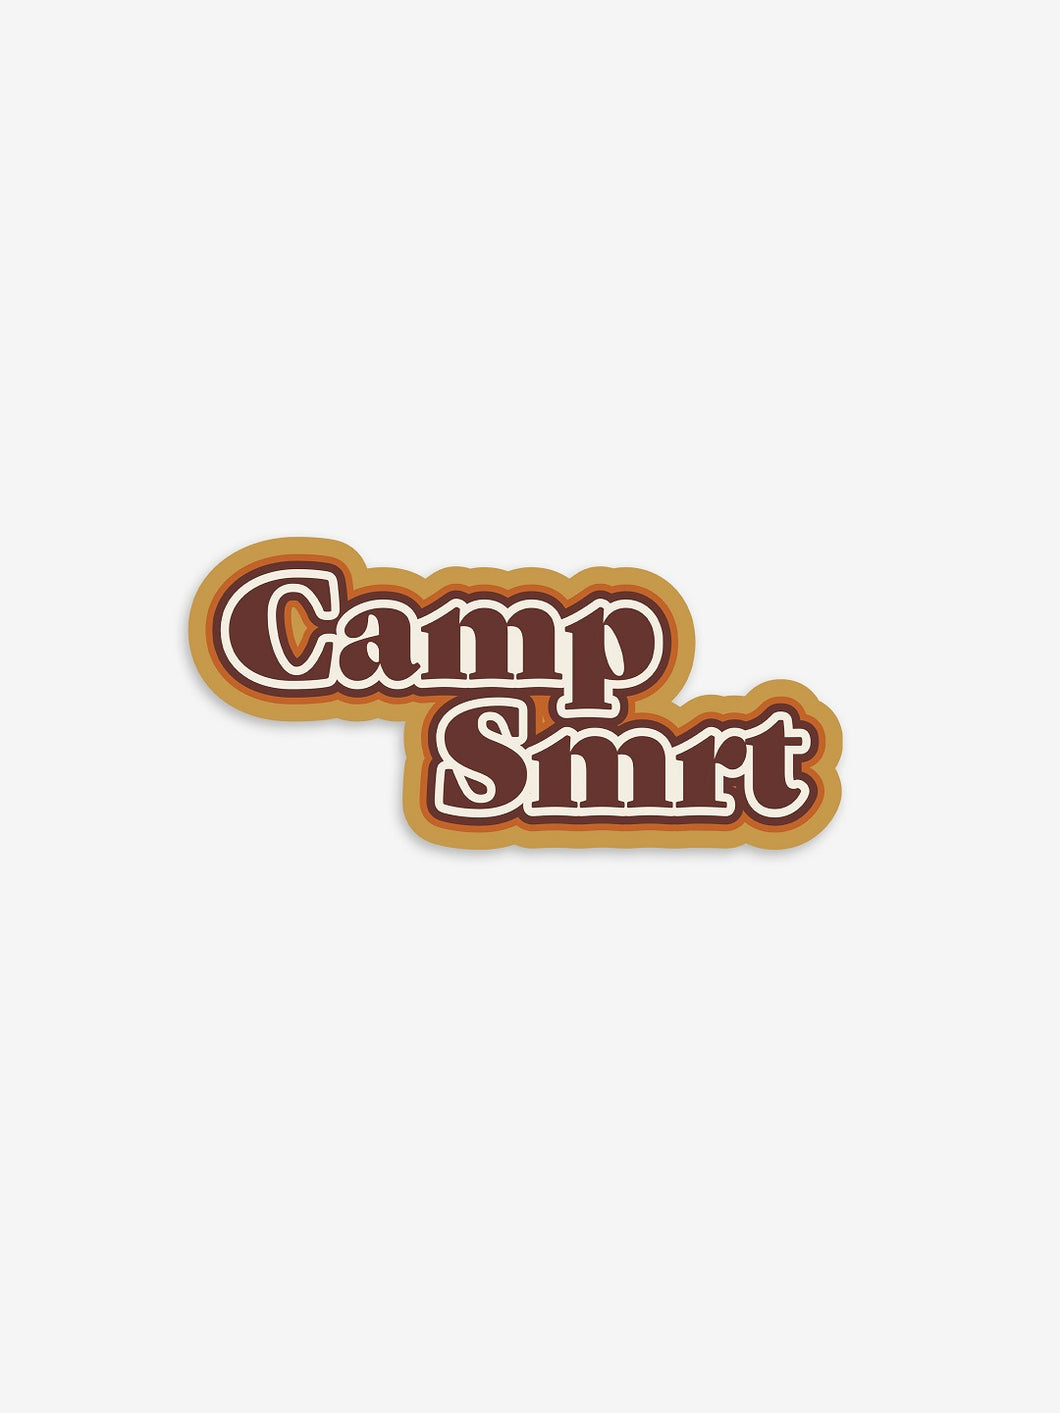 Pictured is a sticker that has the words Camp SMRT in retro brown with a three layered outline of white, orange, and light brown. Perfect to stick on your 4runner or roof tent rack! Available for sale by SMRT Tent in Denver, Colorado, USA.